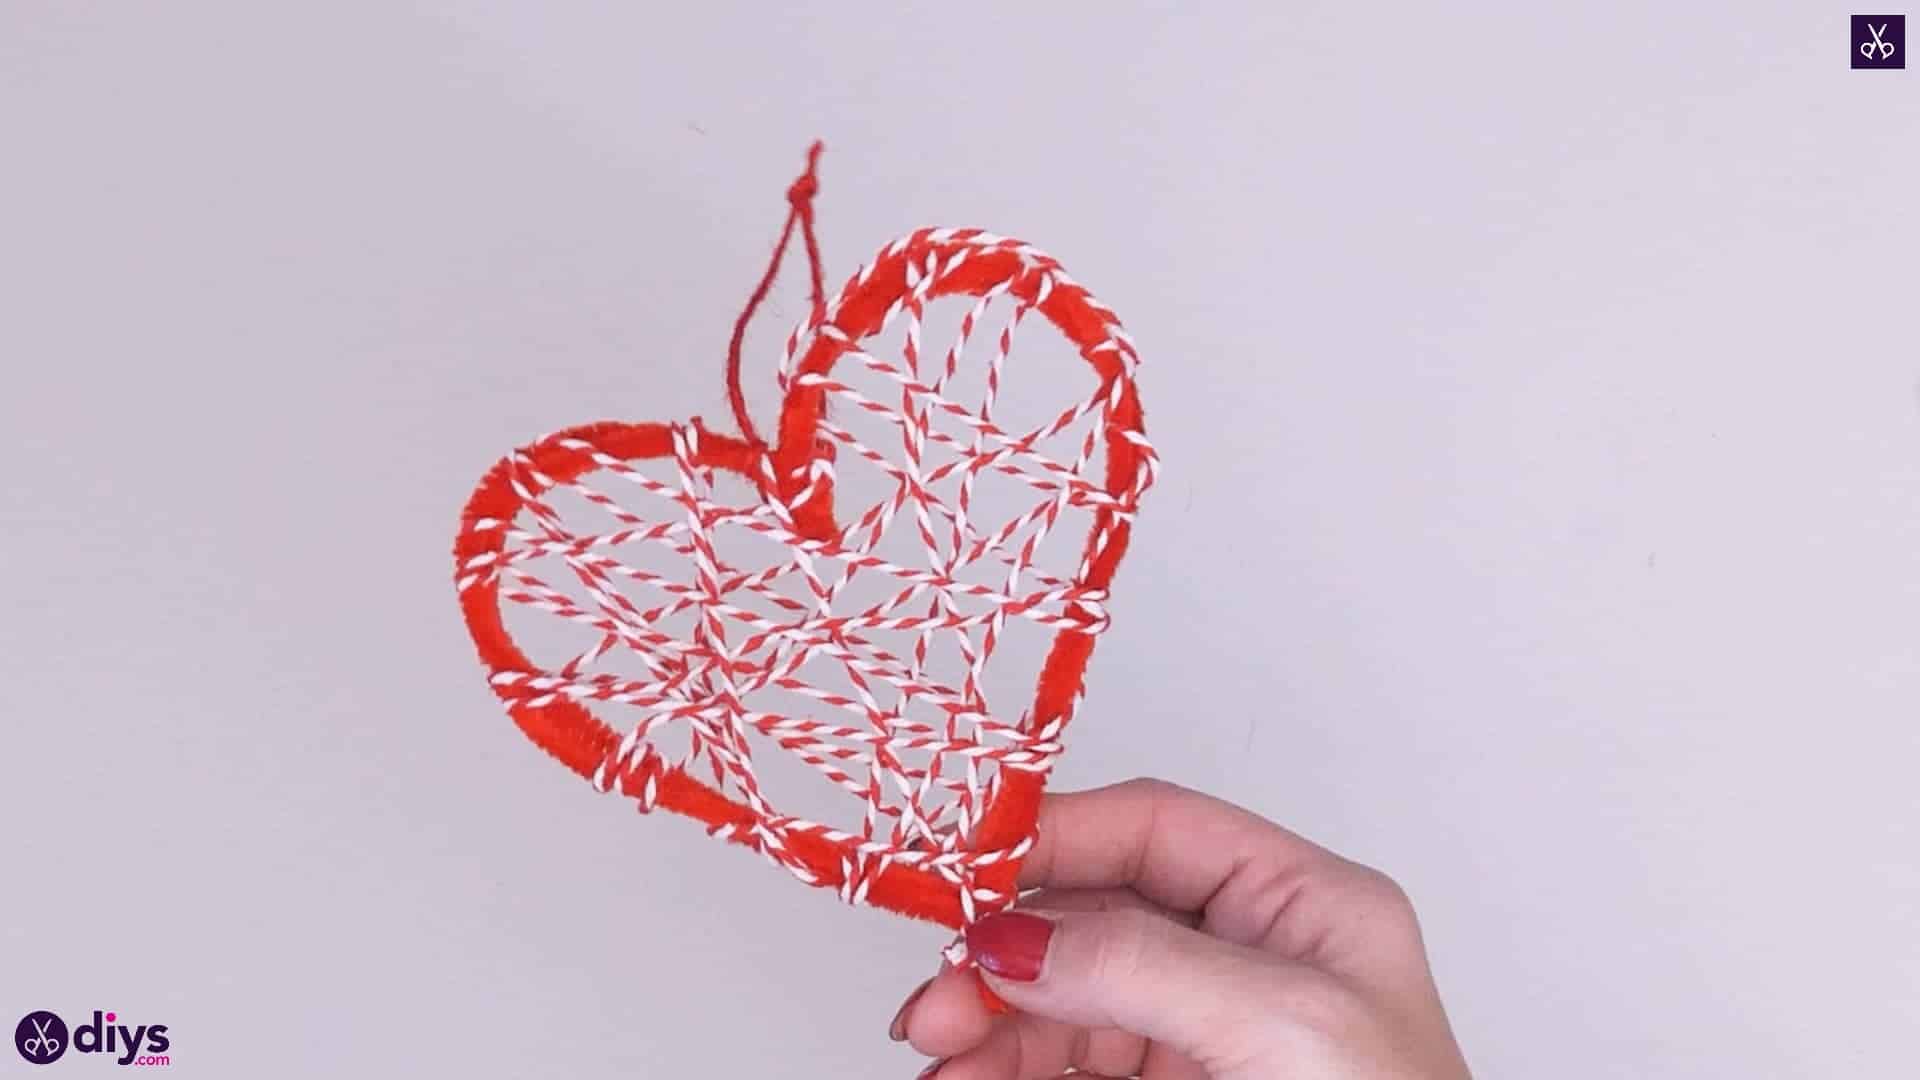 Diy hanging heart wall decor project